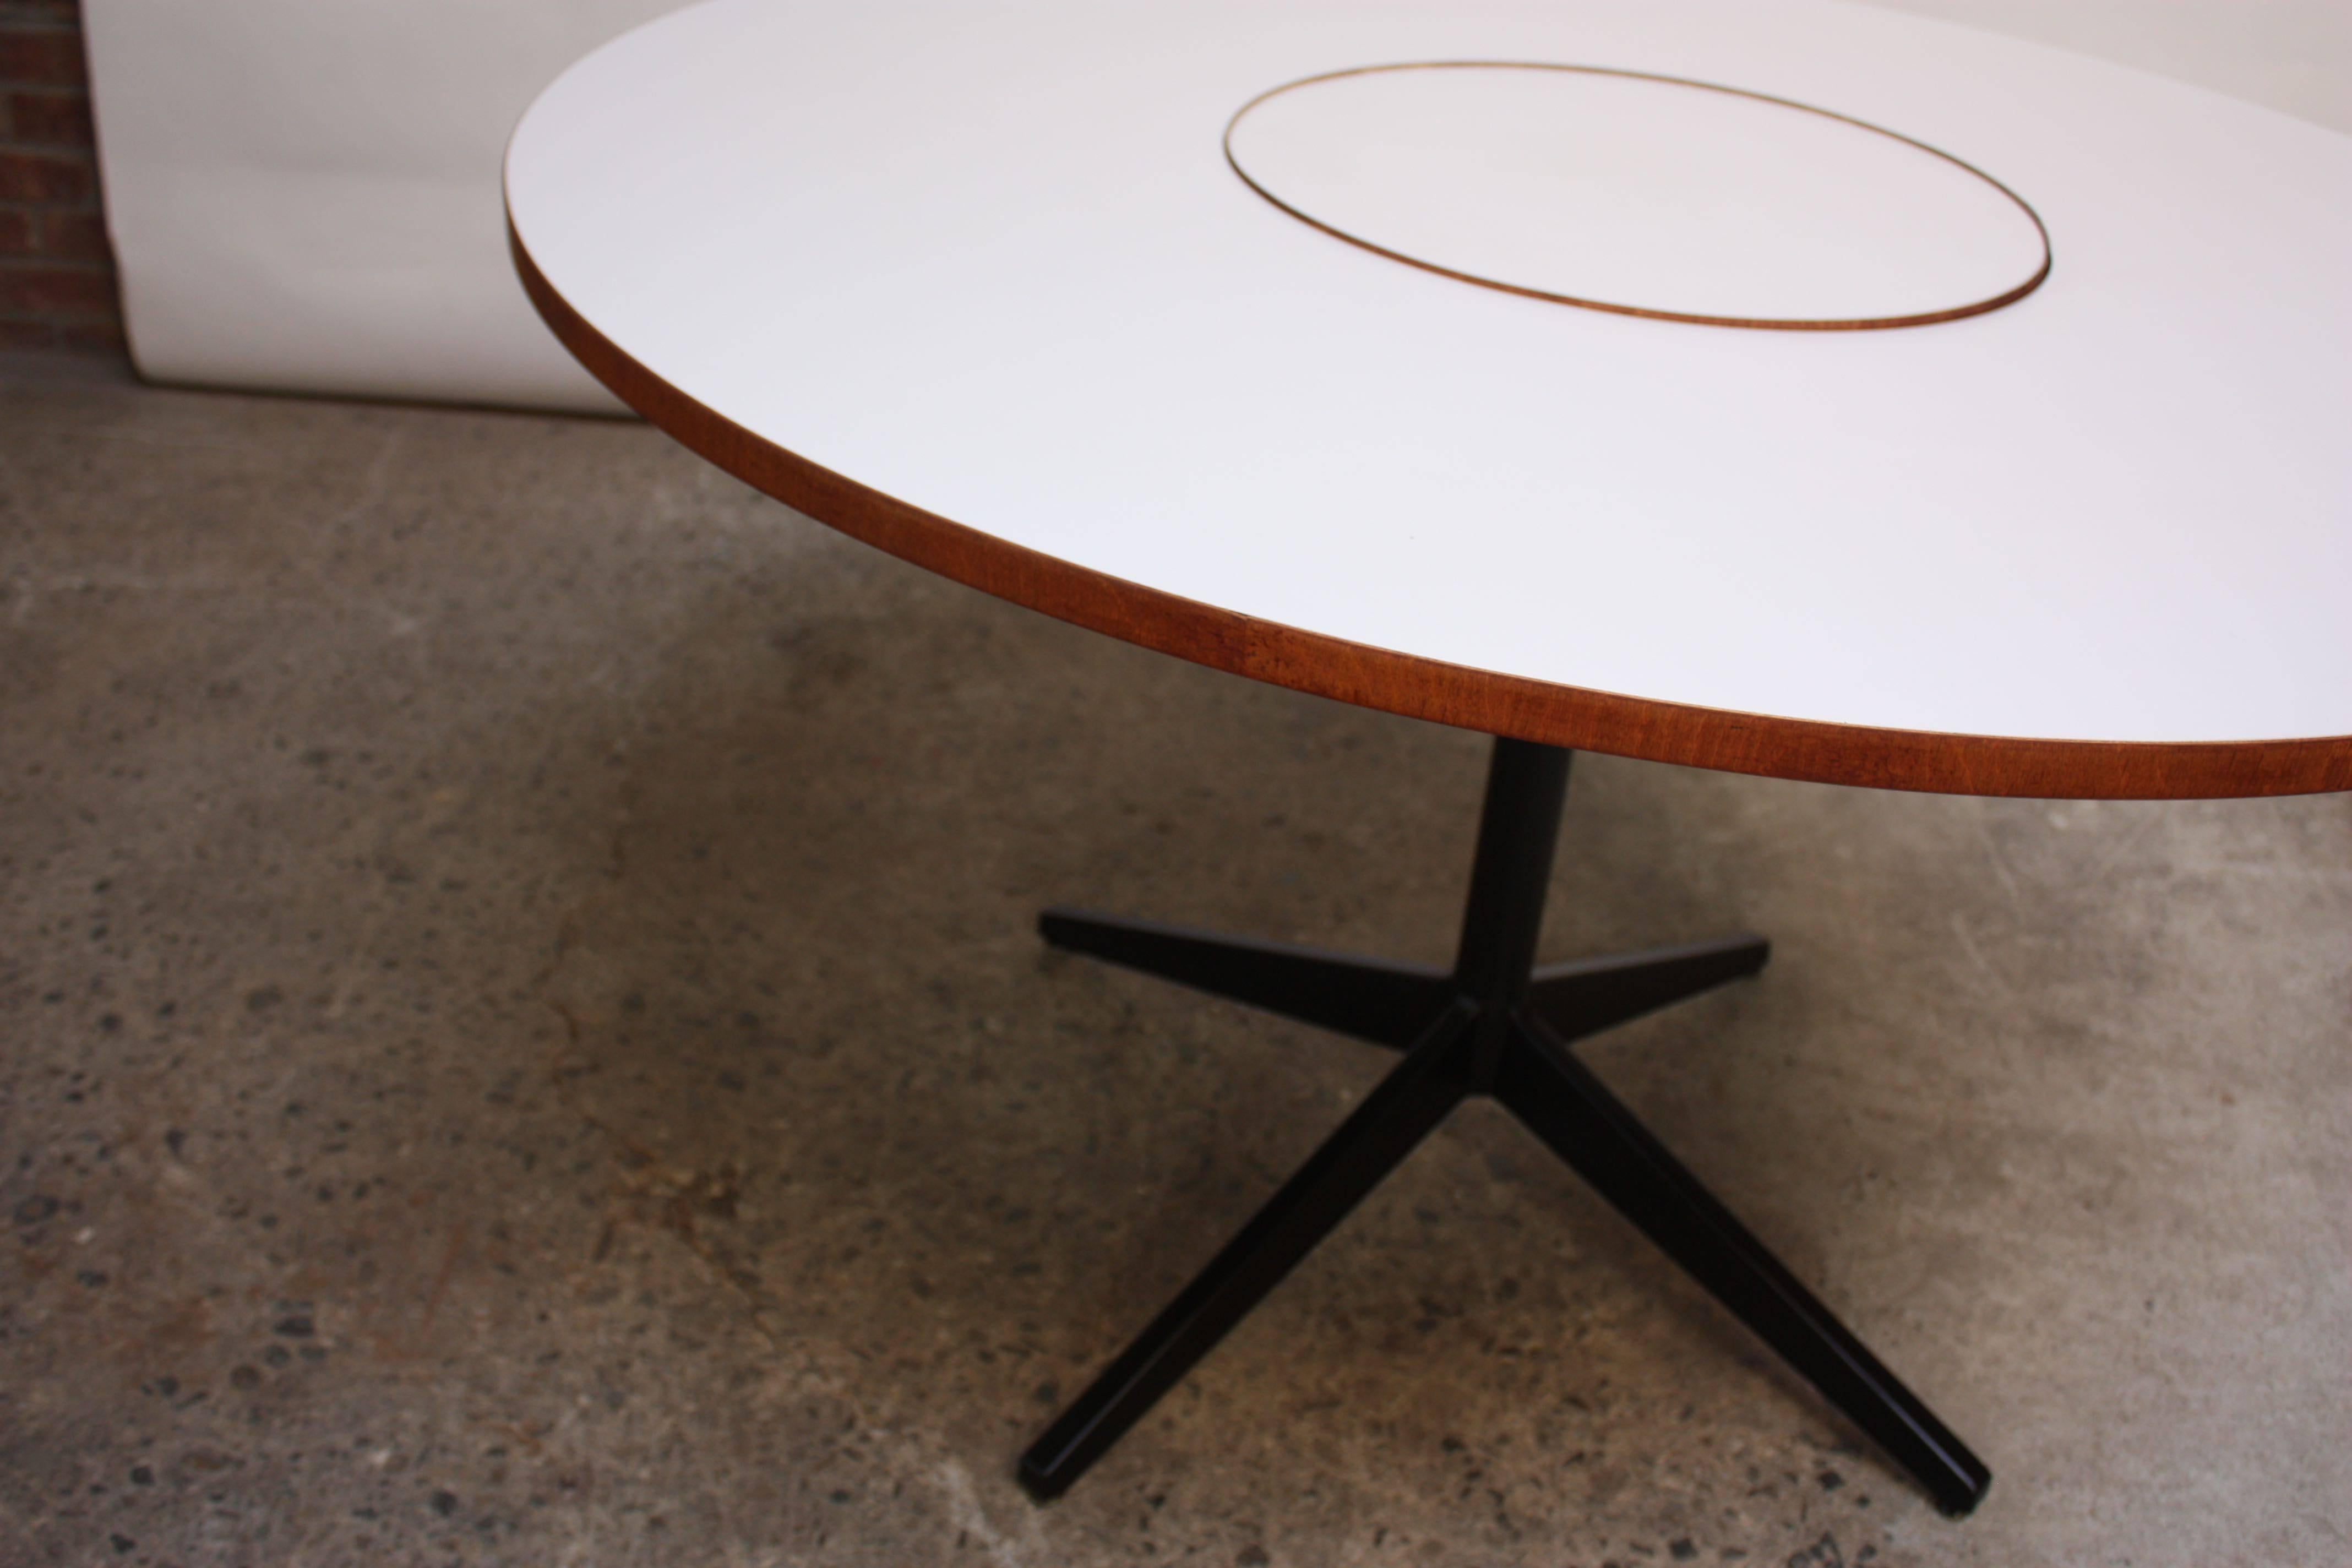 This circular table was designed by George Nelson for Herman Miller in the 1950s and features a white laminate top with rosewood trim. In the center is a functional 'Lazy Susan' which allows for full 360 easy access.